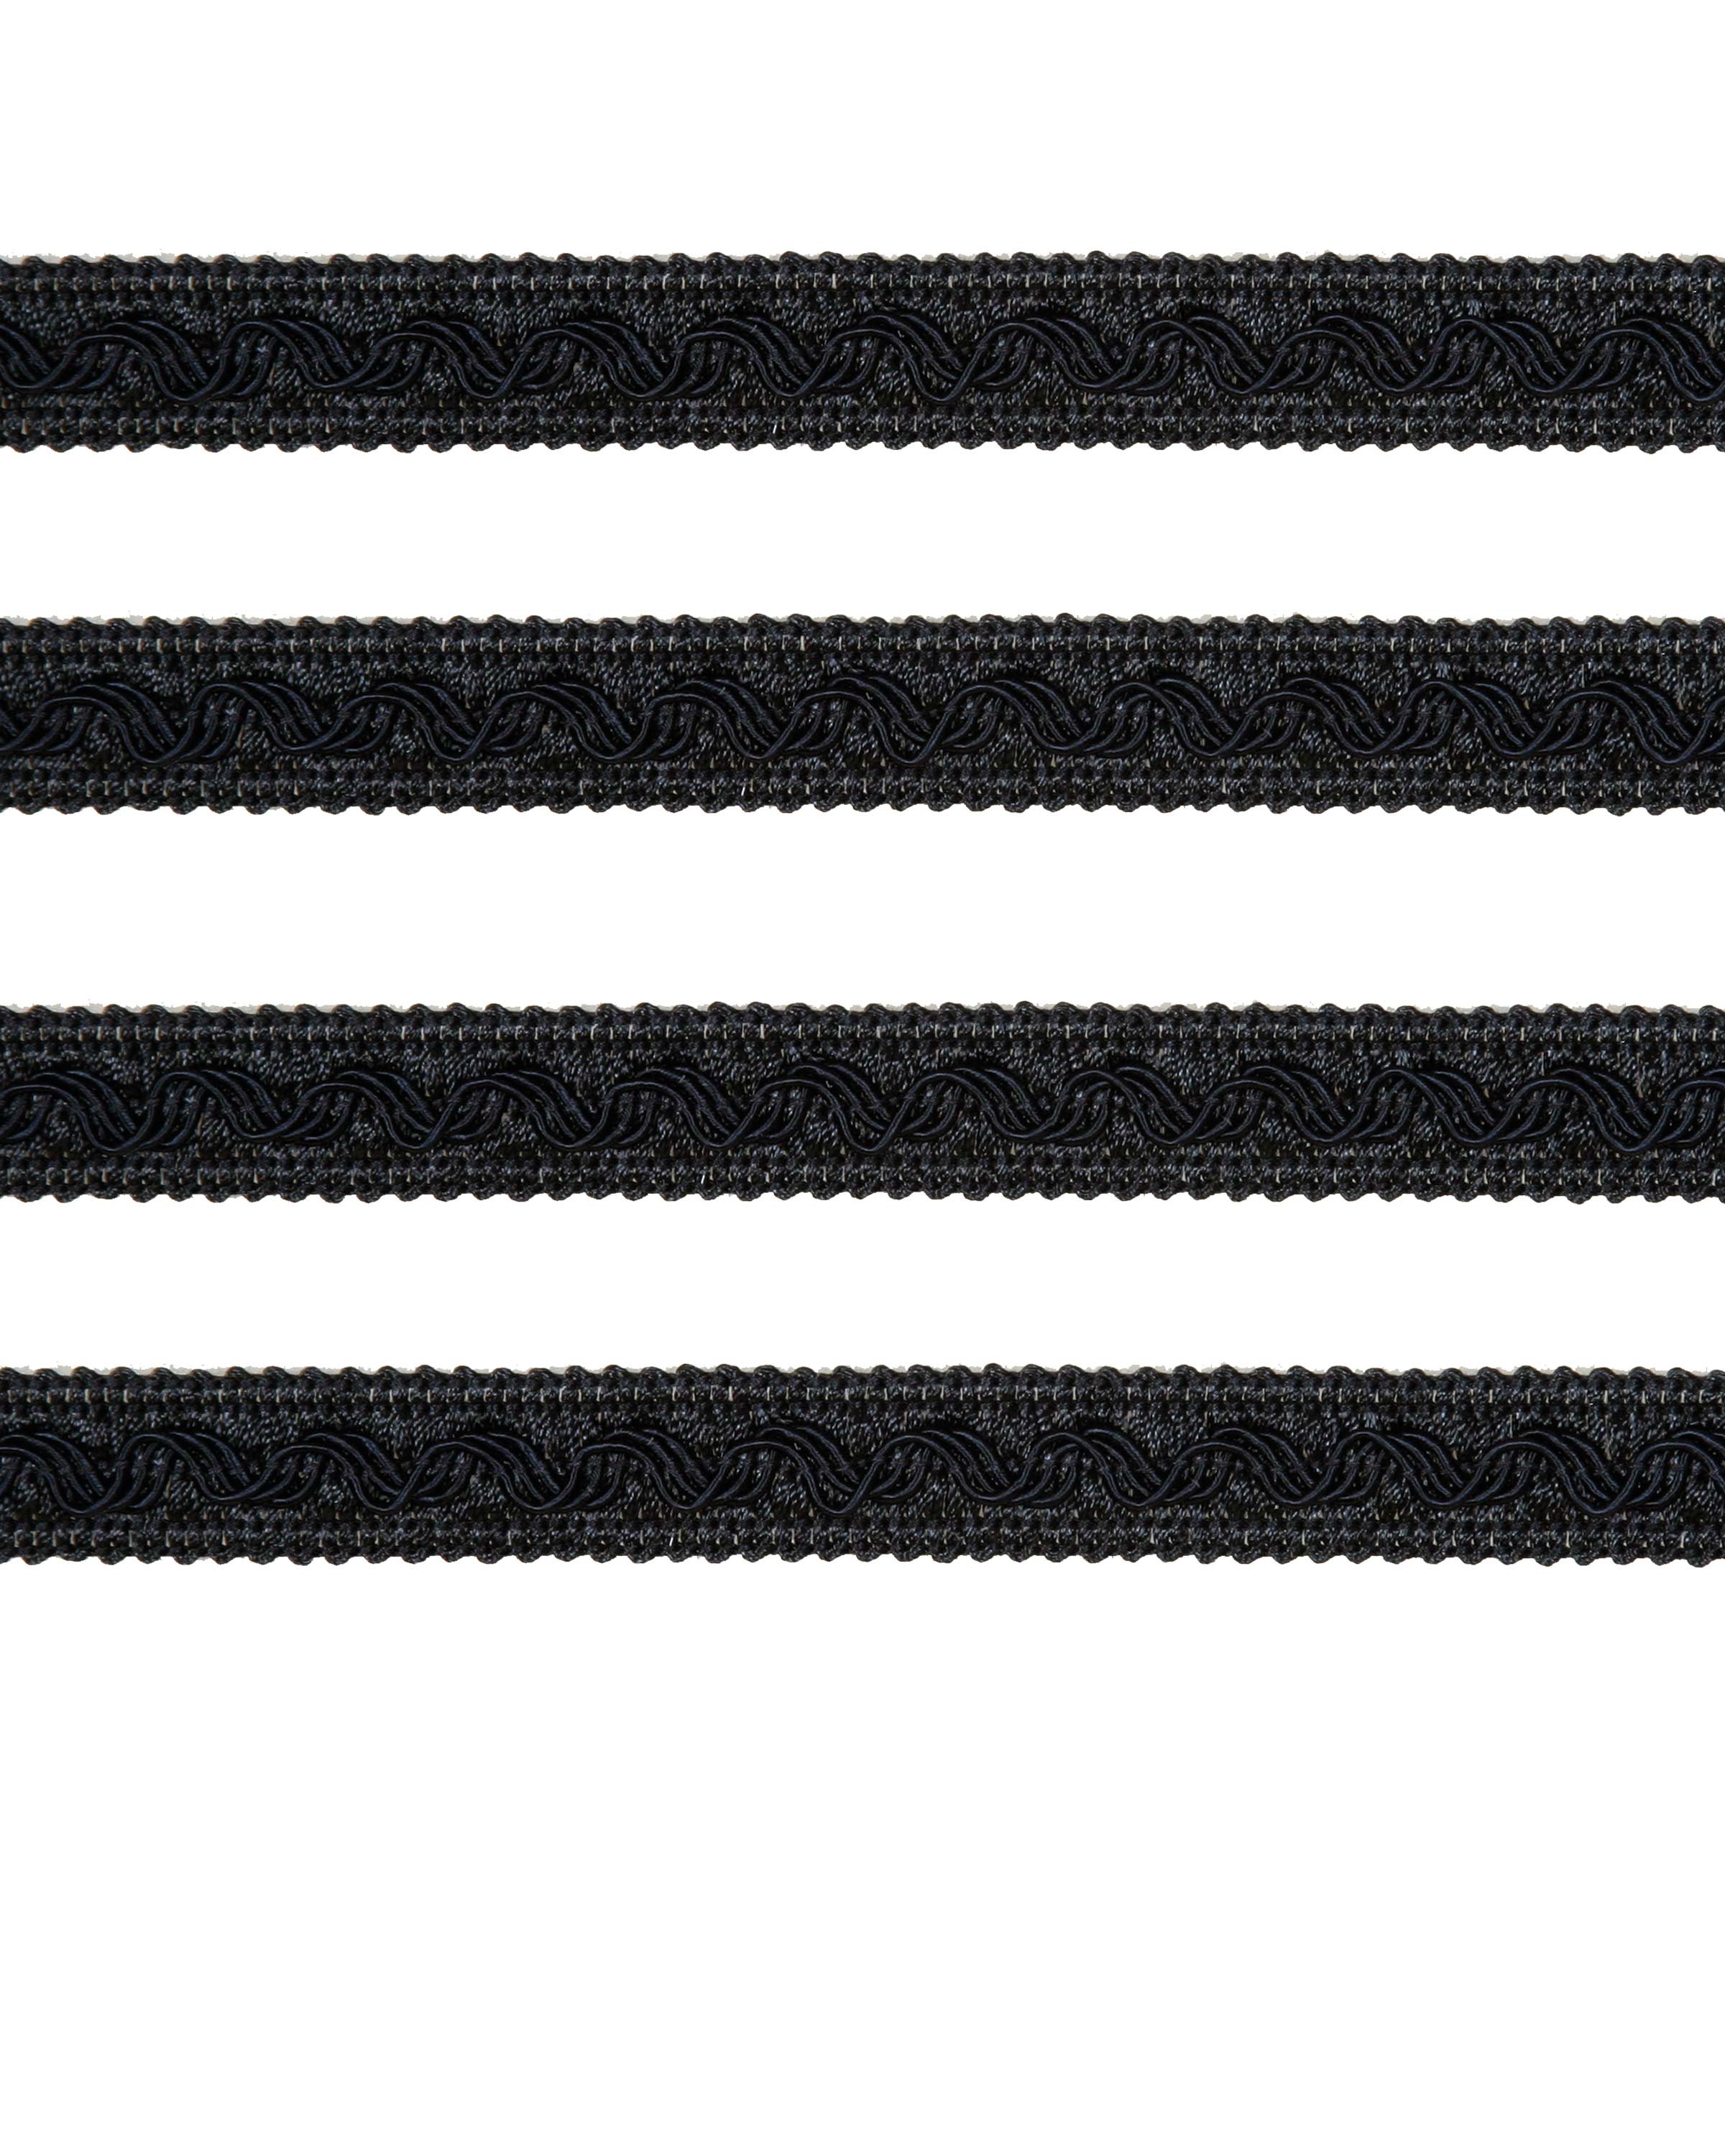 Small Fancy Braid - Black 17mm Price is for 5 metres